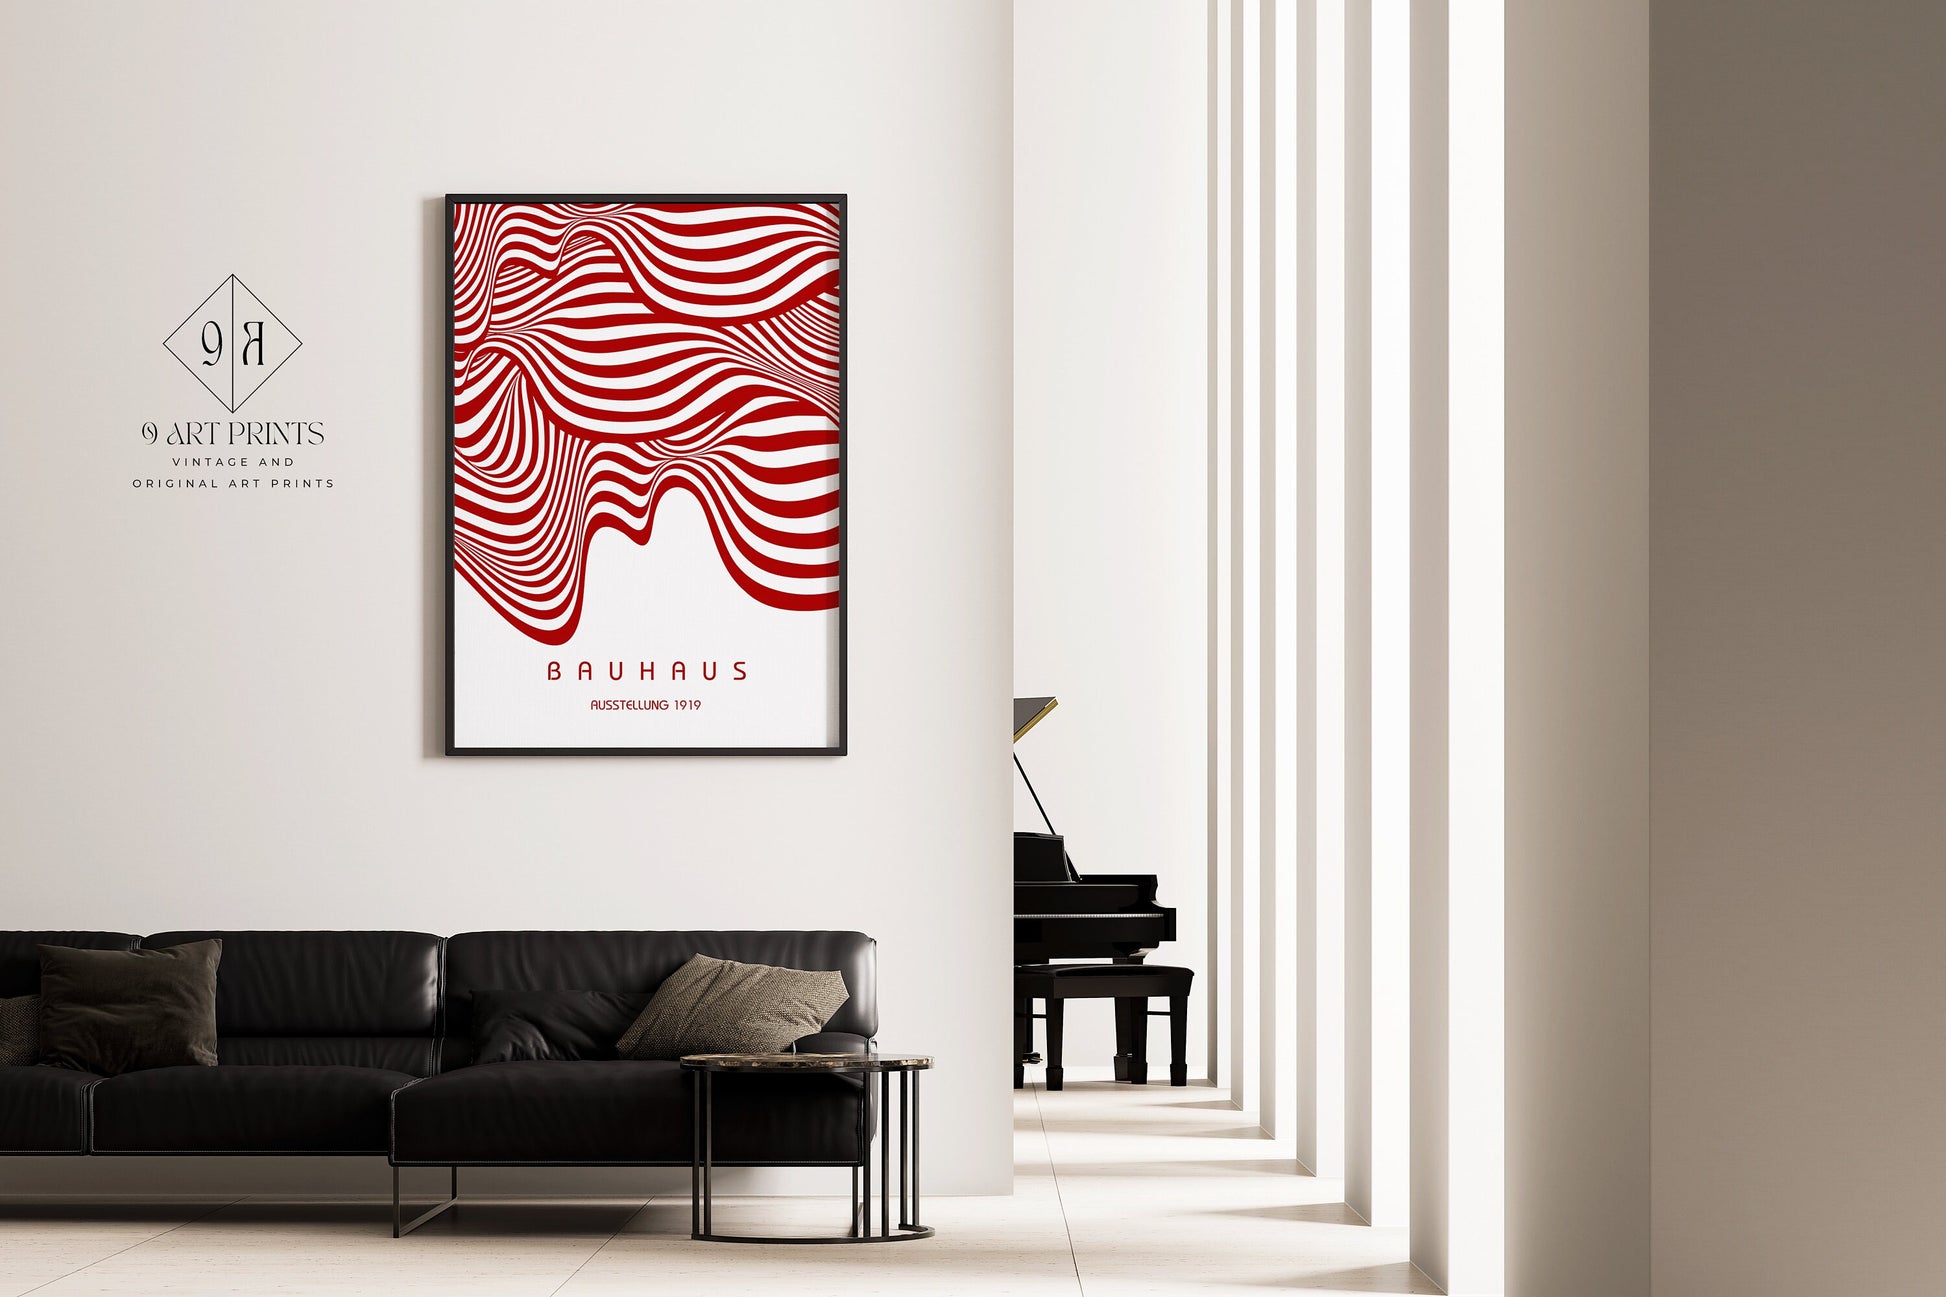 Framed Bauhaus Red White Poster Mid Century Modern Museum Art Print Vintage Minimalist Abstract Ready to hang Home Office Decor Gift Idea